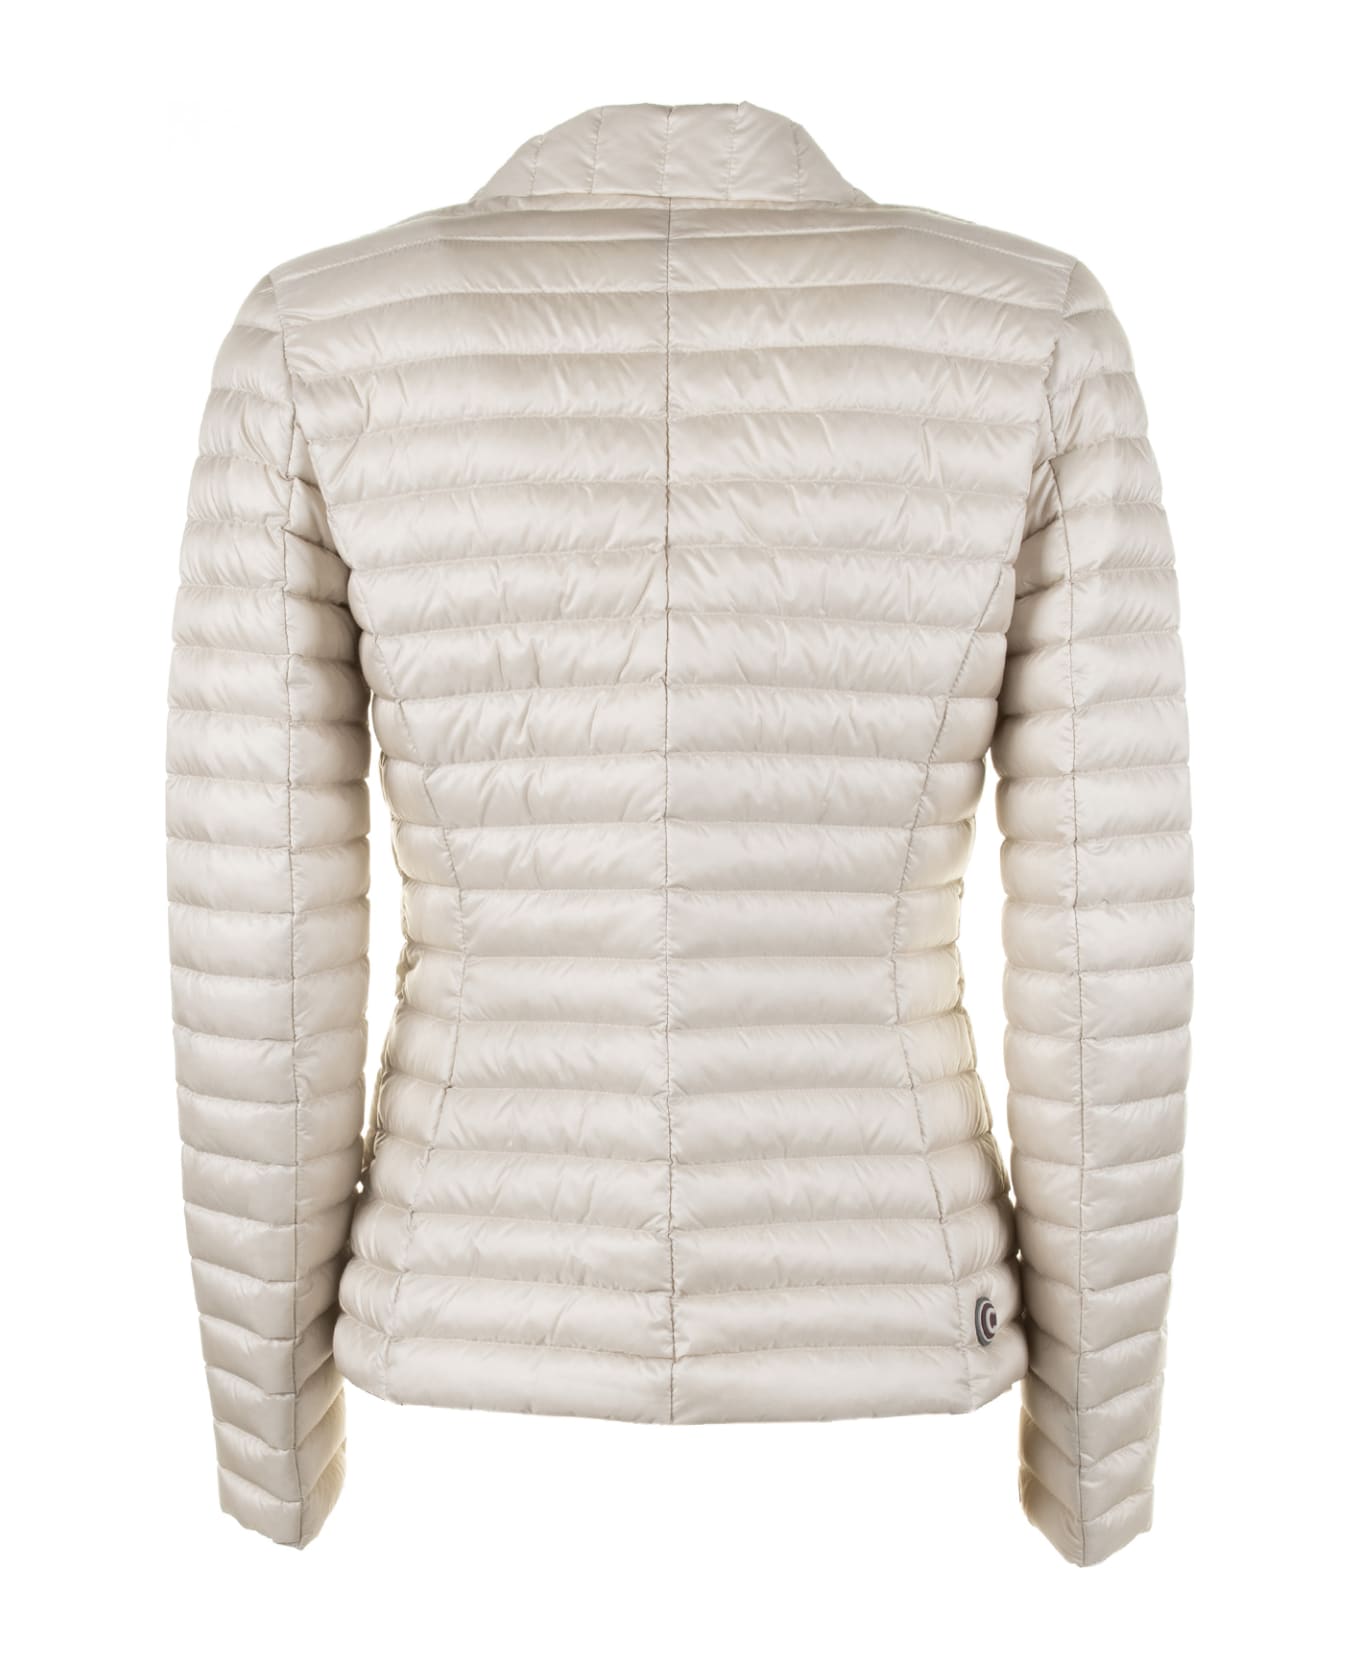 Colmar Blazer Quilted Down Jacket With Lapel Collar - PORCELLANA